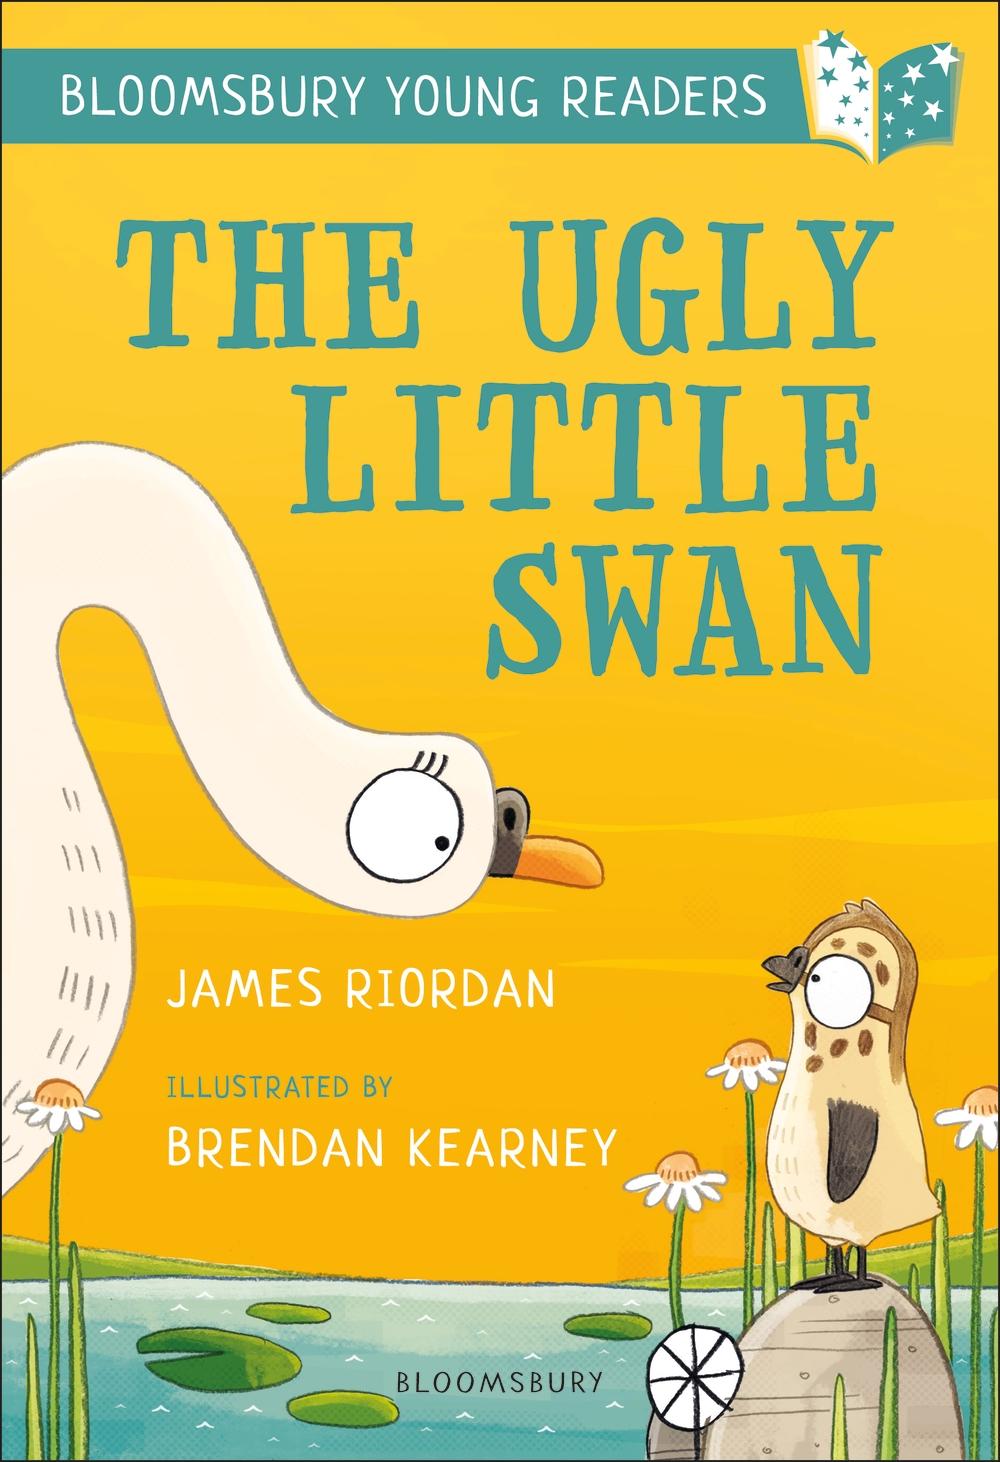 Ugly Little Swan: A Bloomsbury Young Reader